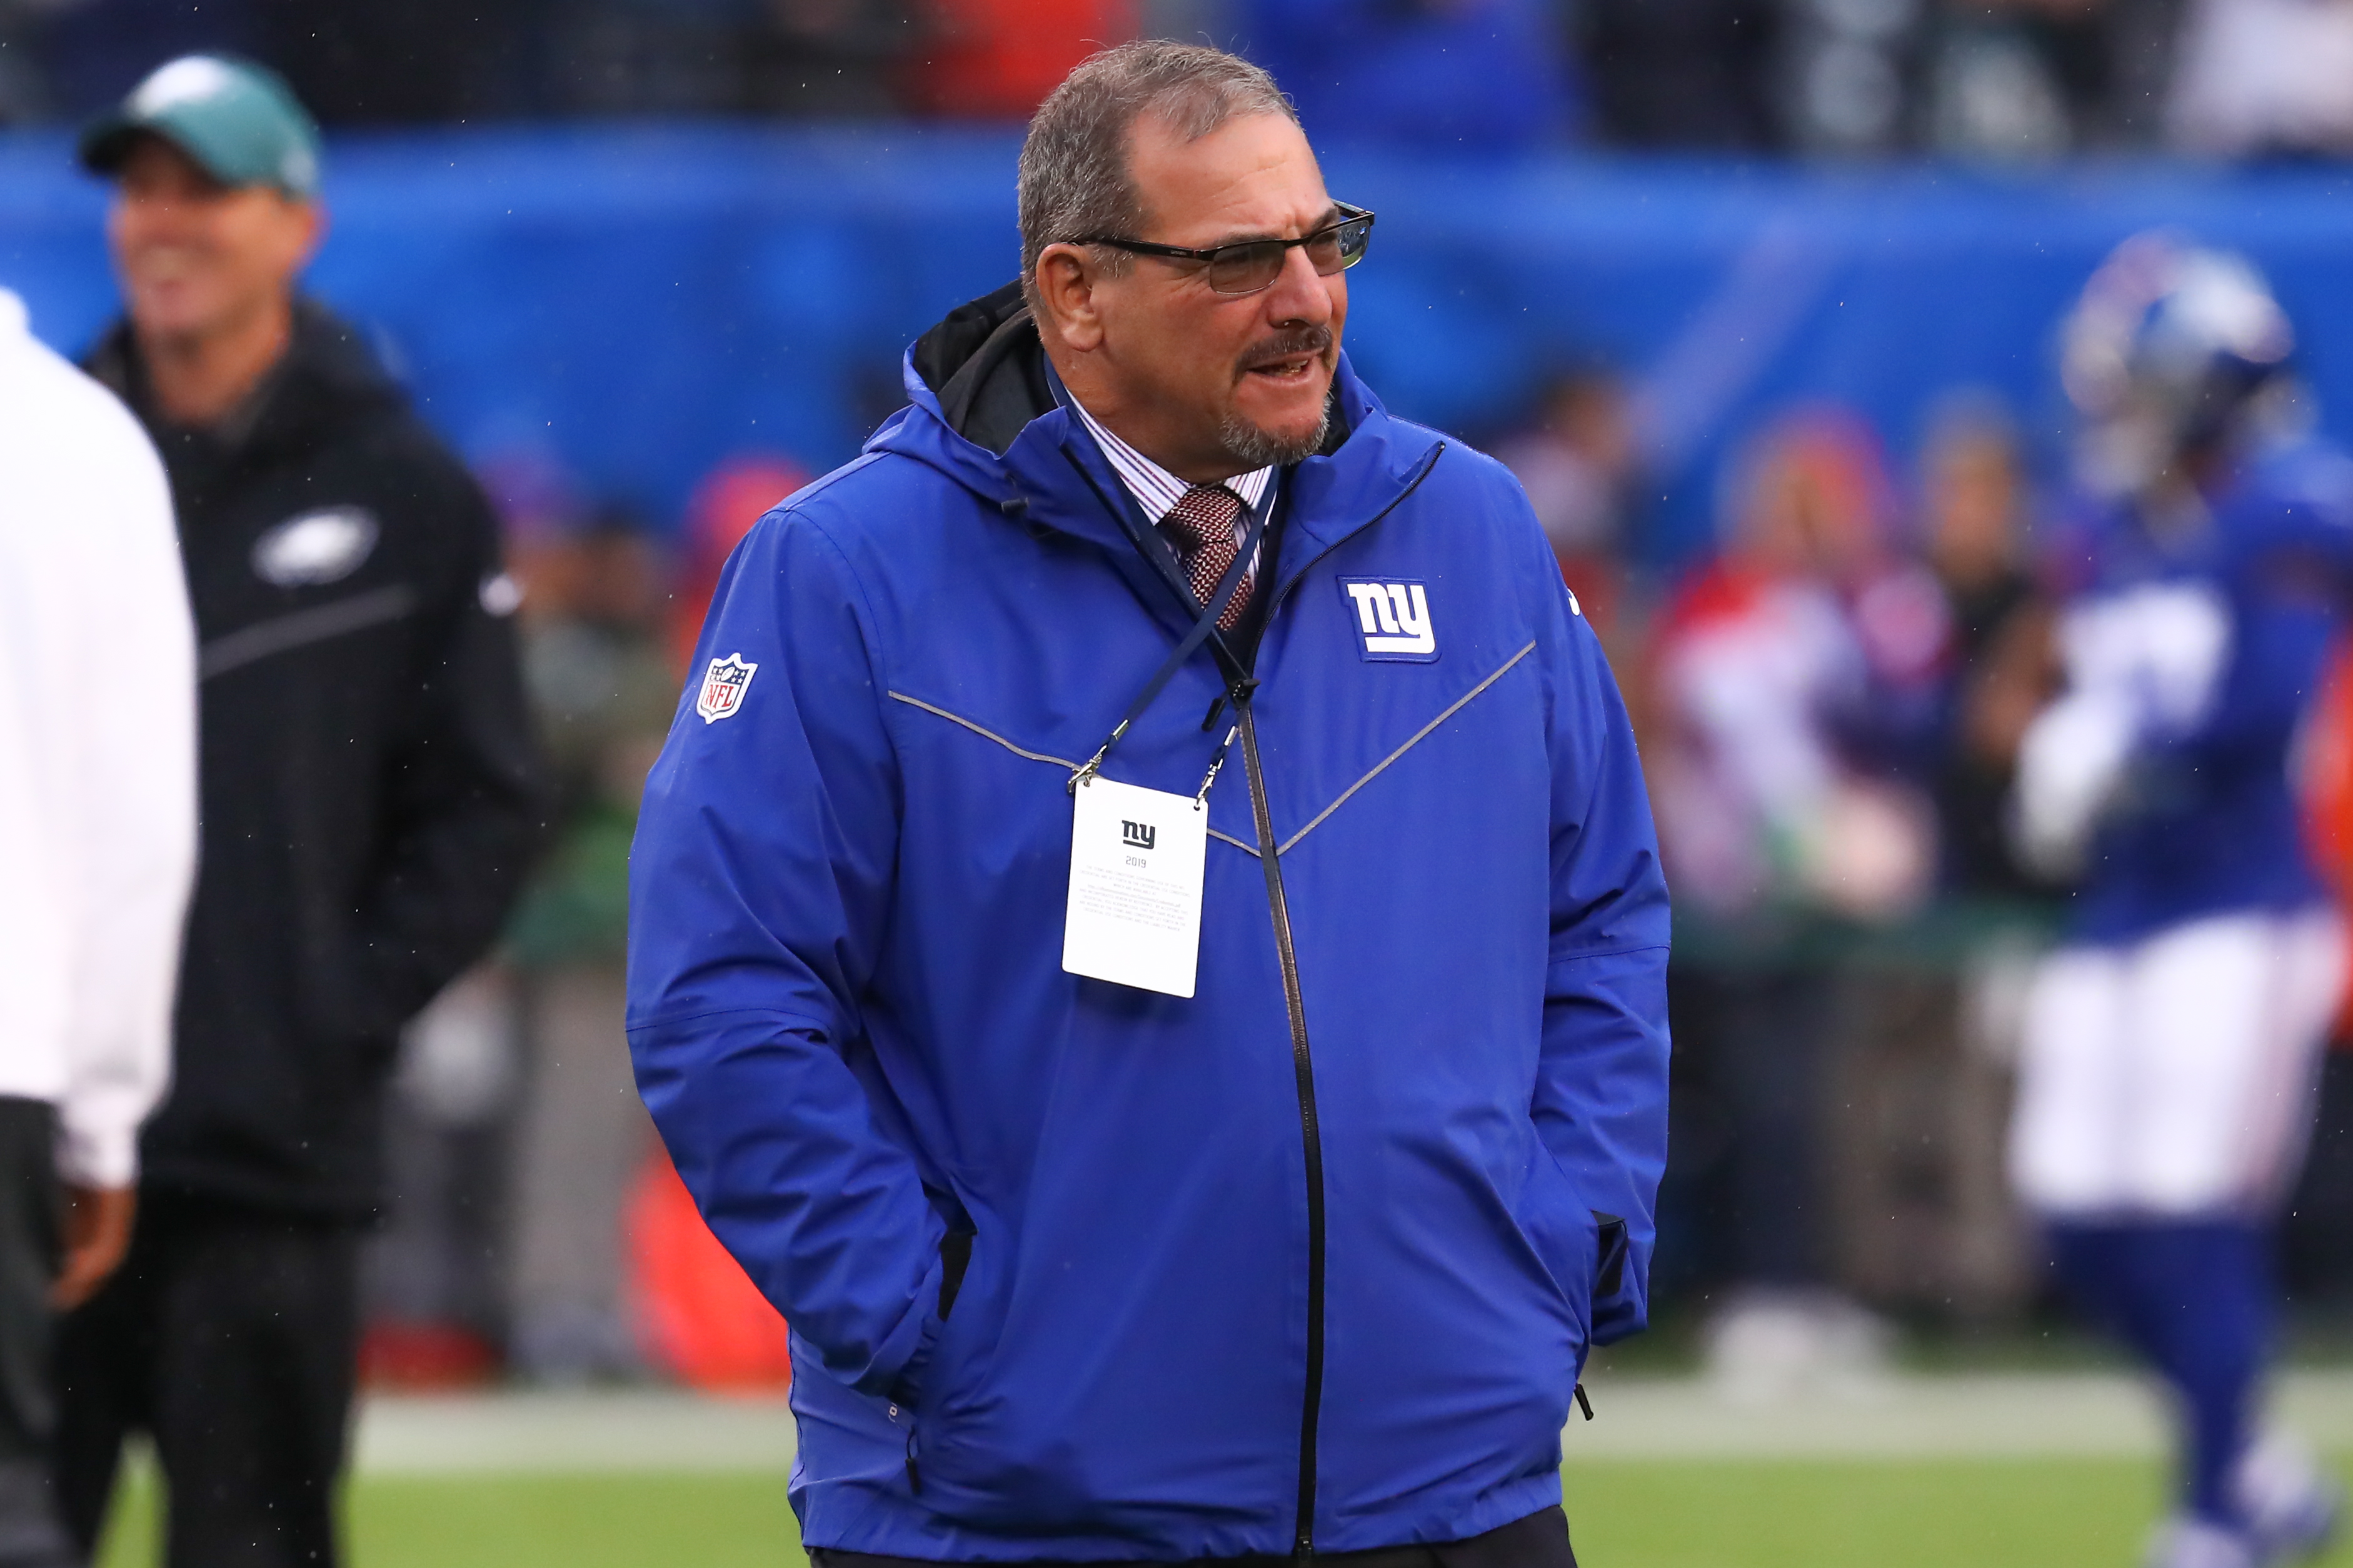 Giants general manager Dave Gettleman on the field before a game